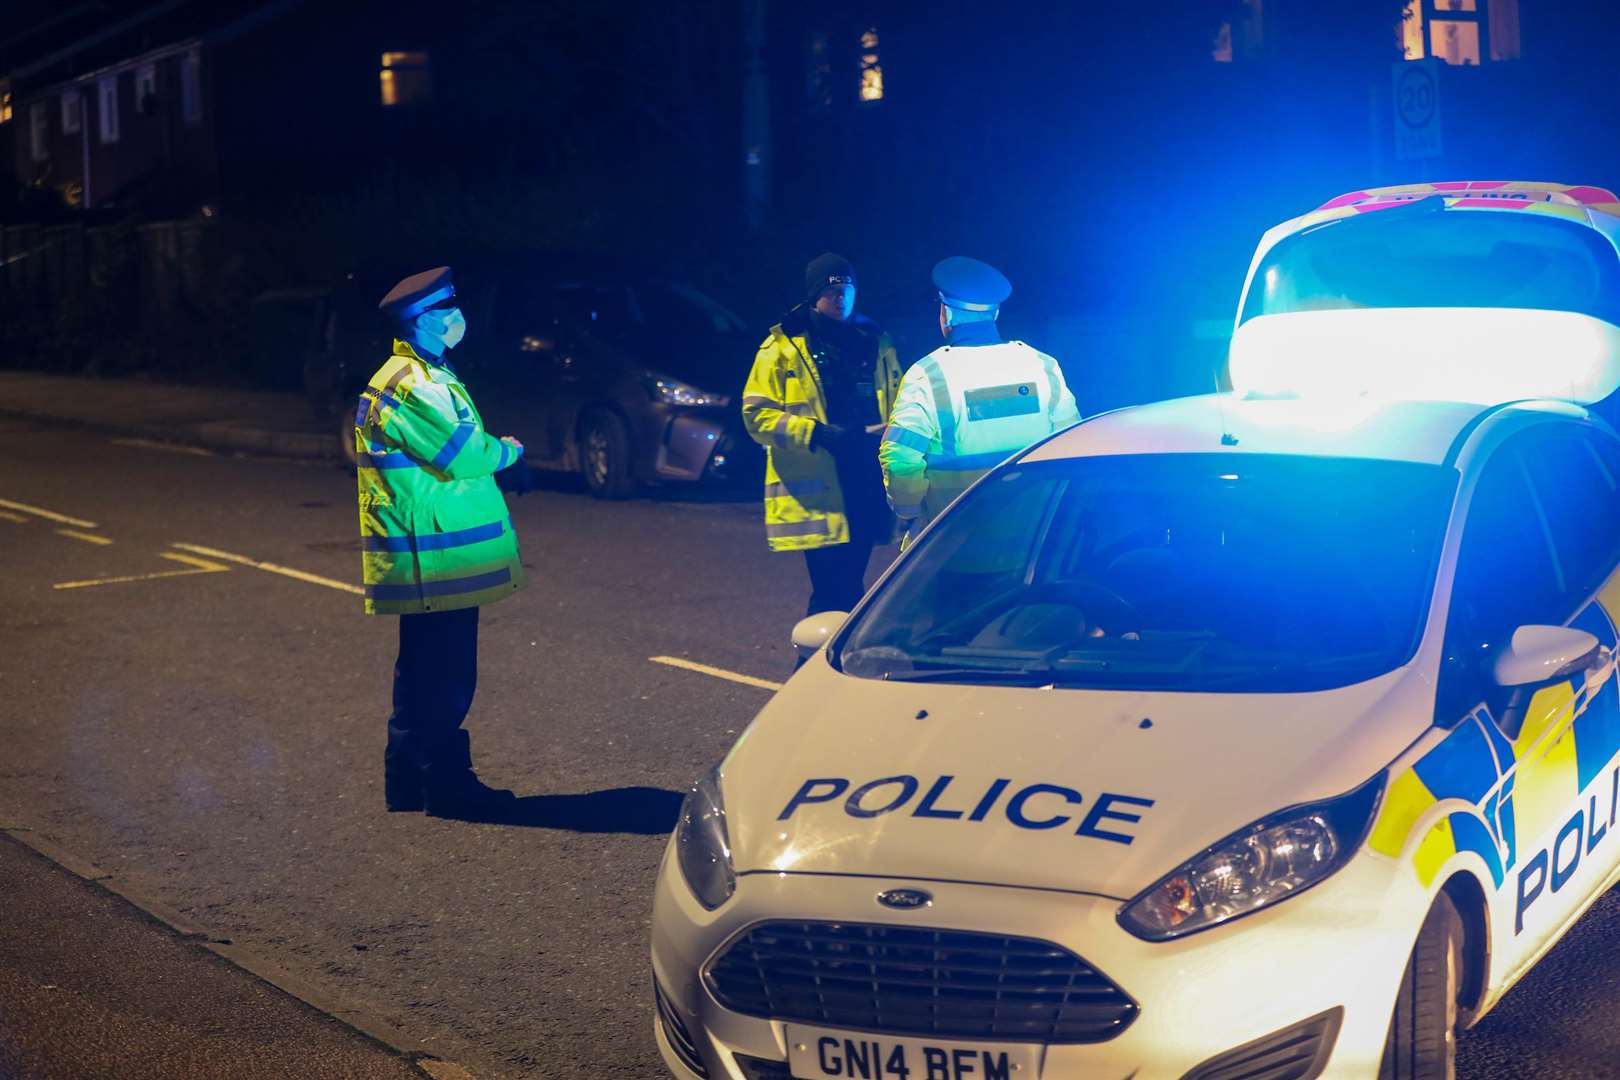 The scene in Caley Road, Tunbridge Wells, where a man was fatally injured on Saturday, December 4 Pic: UKNIP